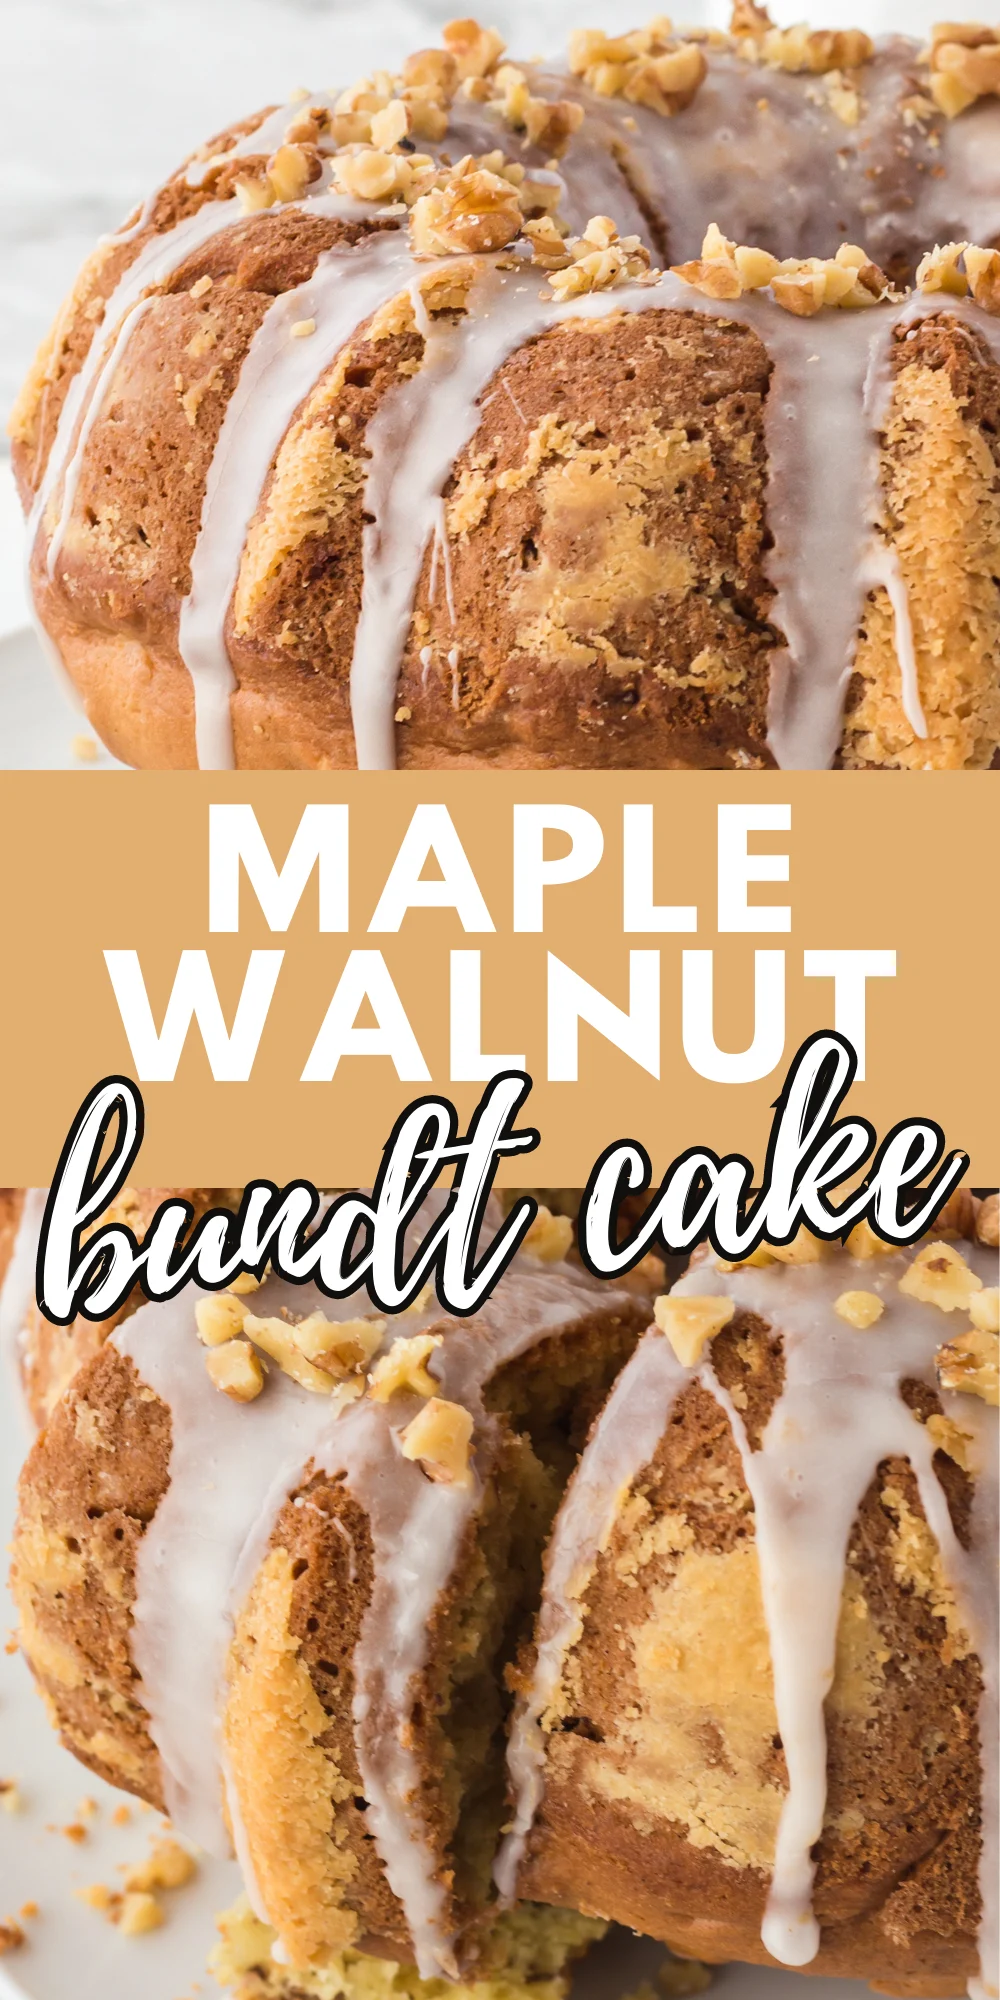 Bundt cake is the perfect dessert for any occasion. It's simple, elegant, and always impresses guests. This Maple Walnut Bundt Cake is no exception - it's sure to be a hit! The cake is moist and fluffy, with a delicious maple flavor and crunchy walnuts. It's the perfect combination of flavors and textures, and definitely not one to miss out on.